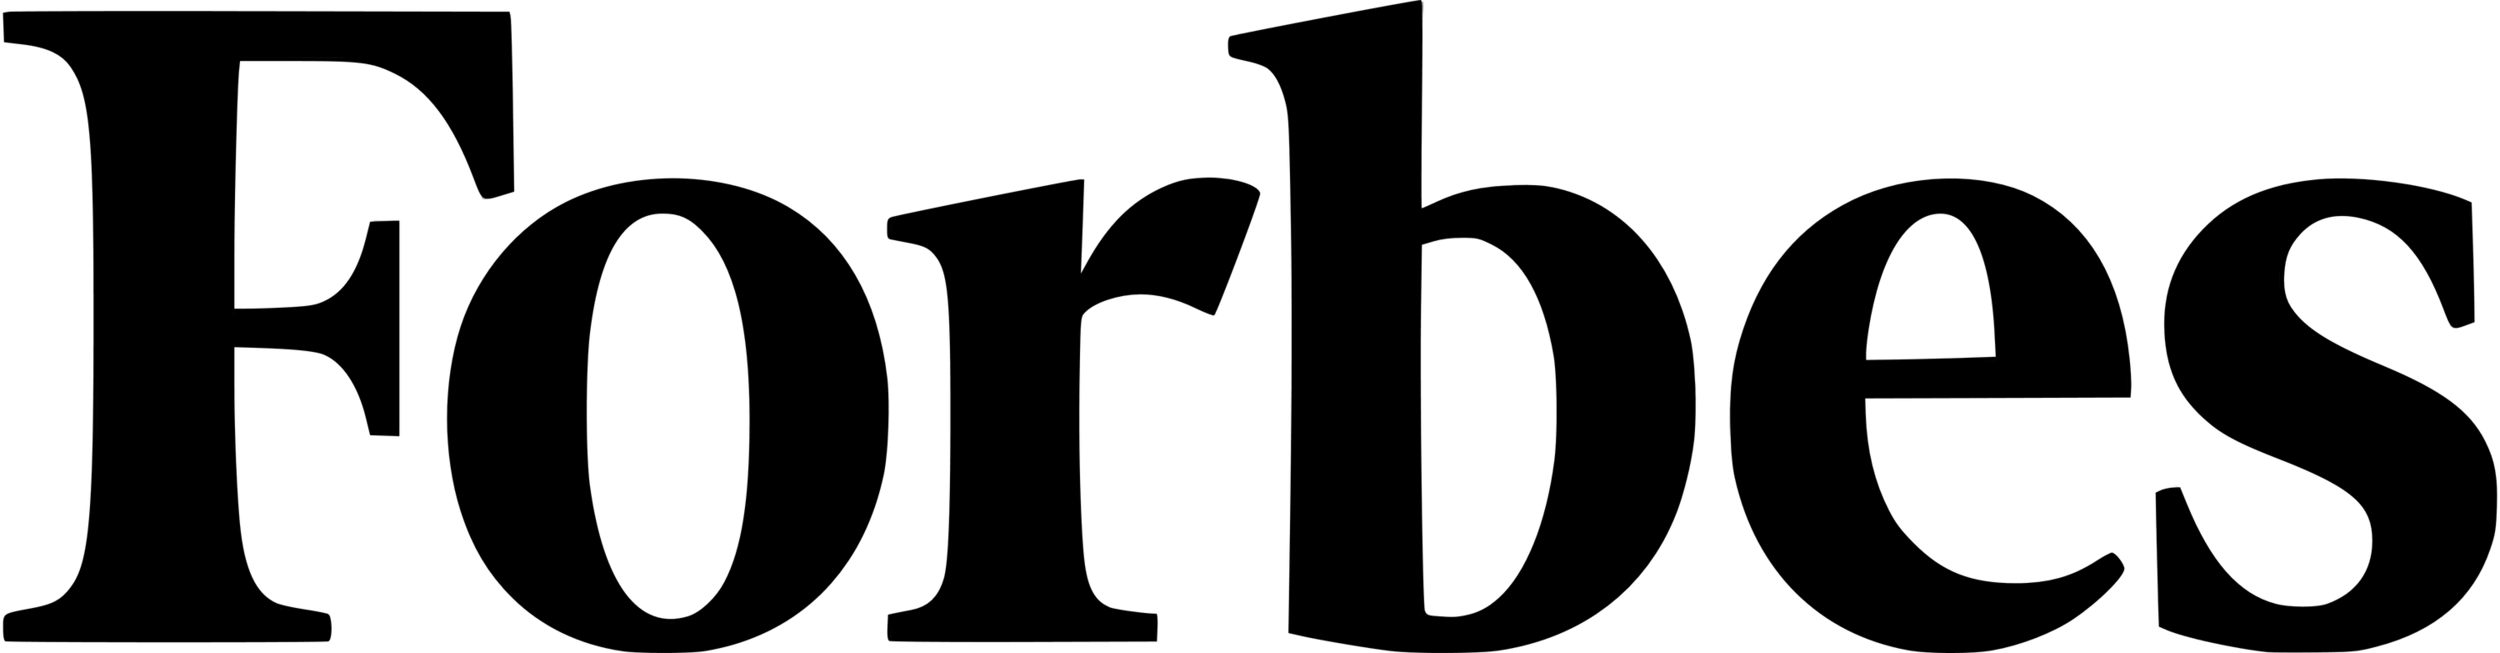 Forbes_logo_PNG2.png